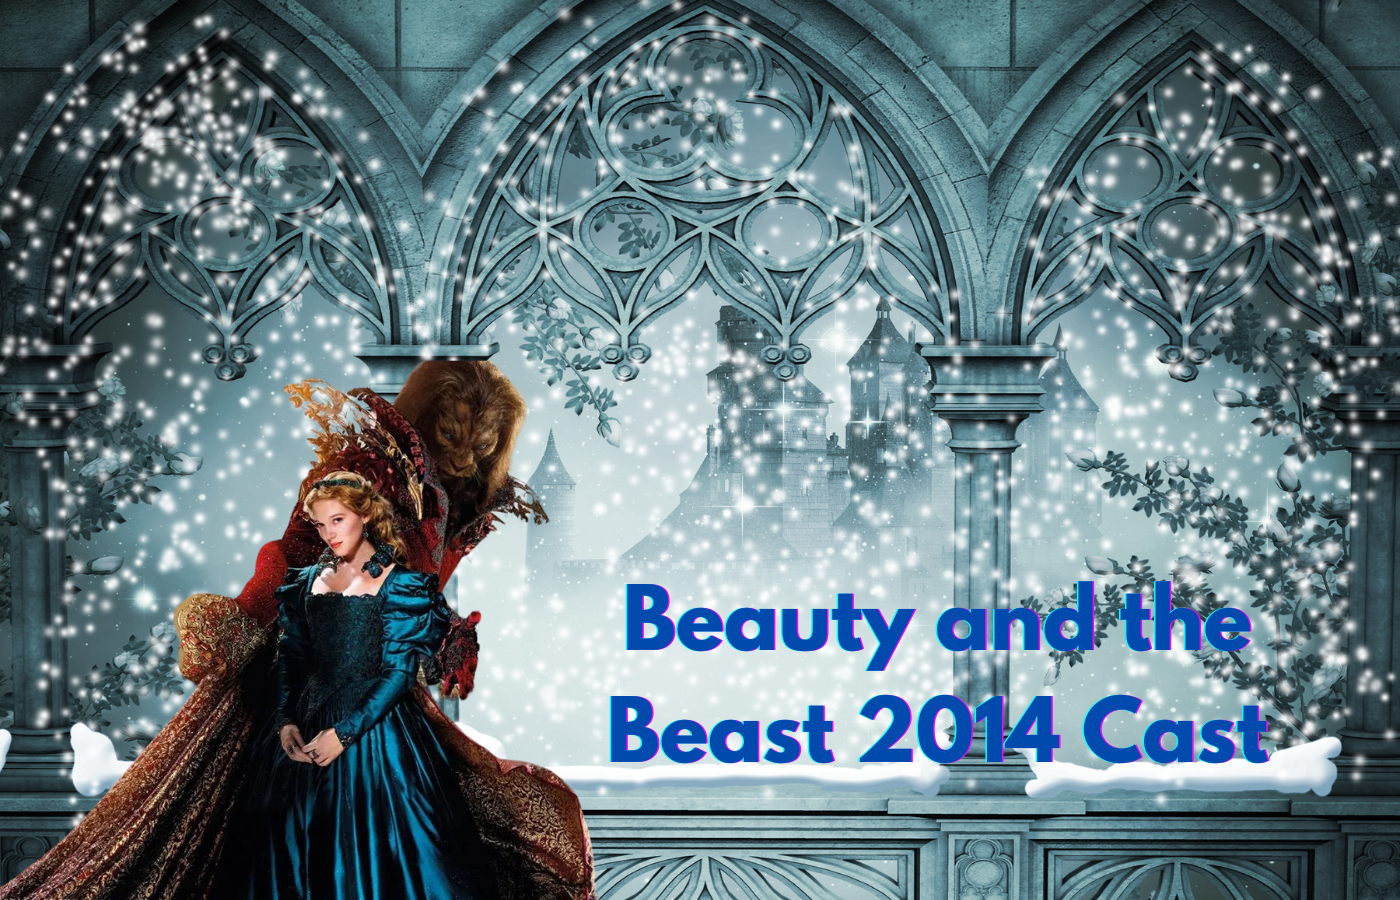 Beauty and the Beast 2014 Cast